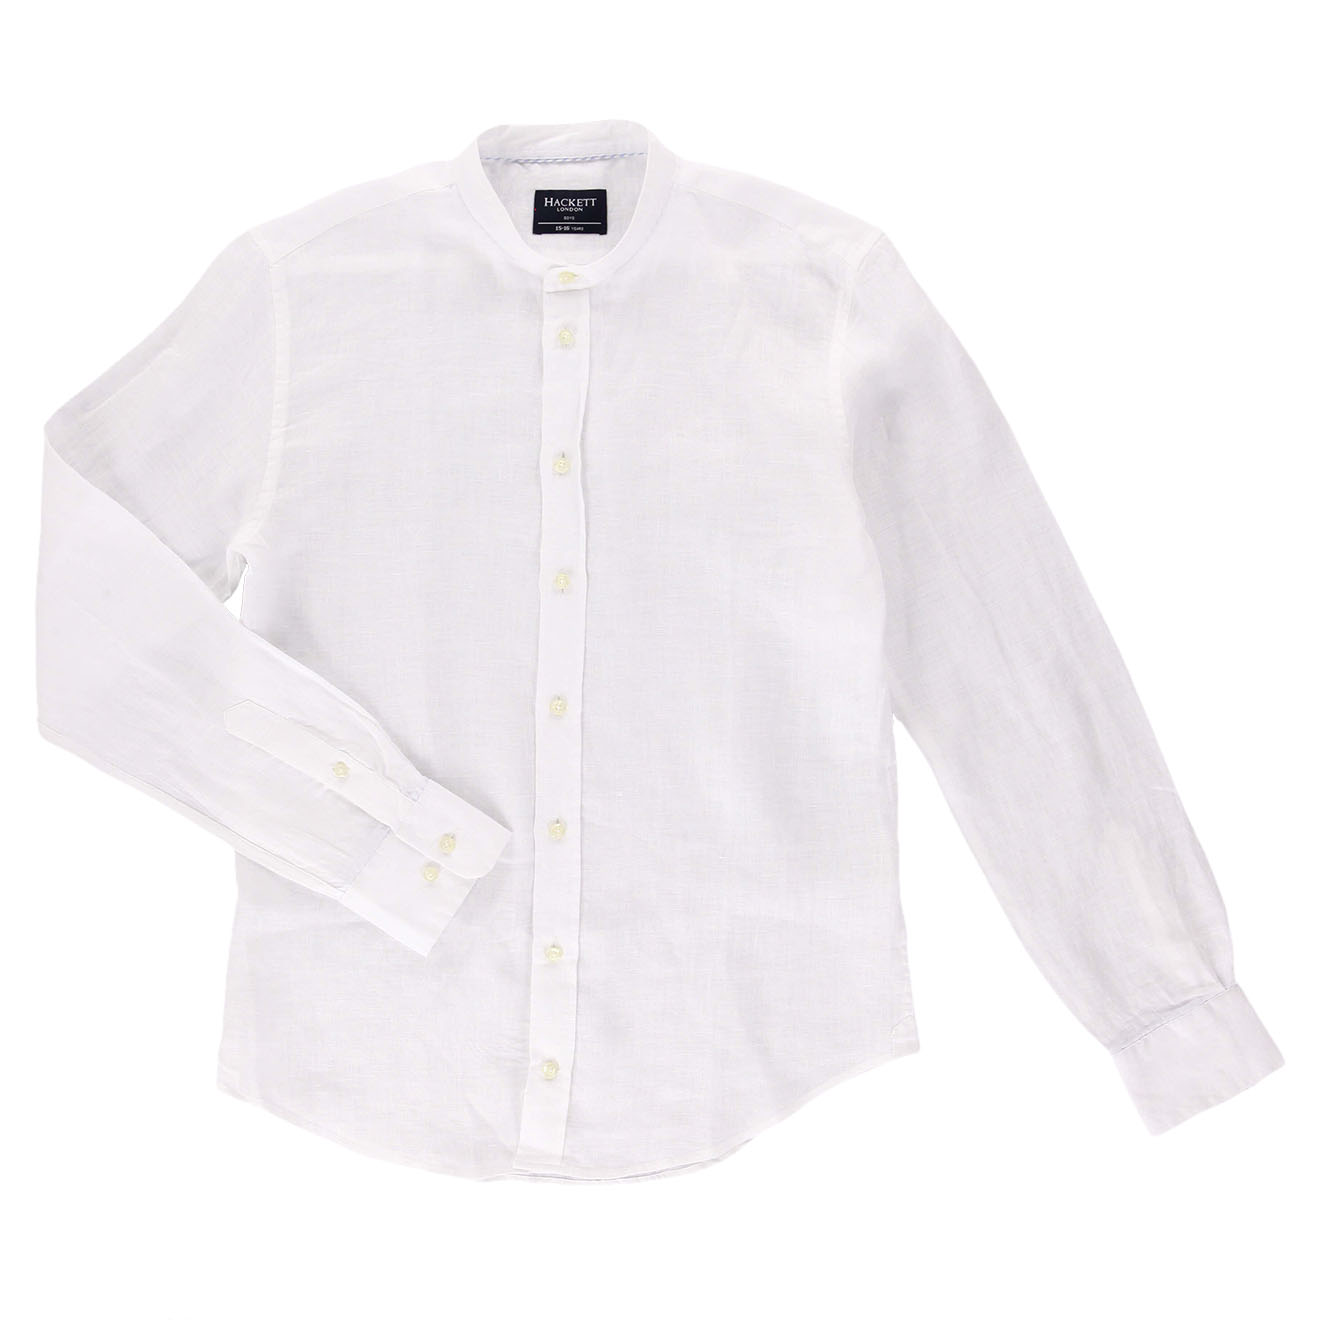 Chemise 100% Lin blanche - T.9/15A